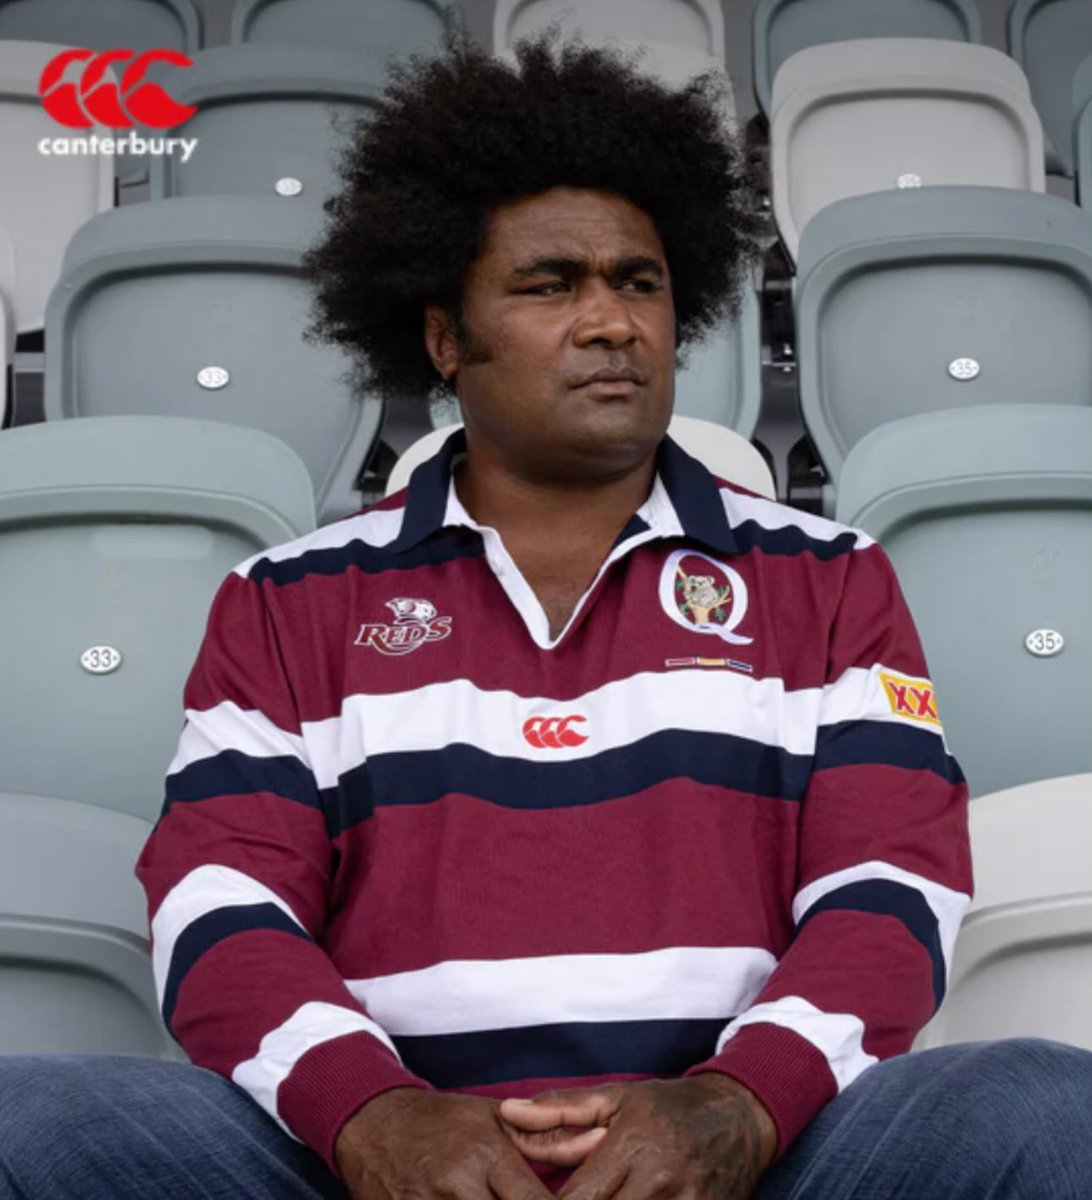 A big ol’ YES to this Queensland Reds heritage jersey 🤩